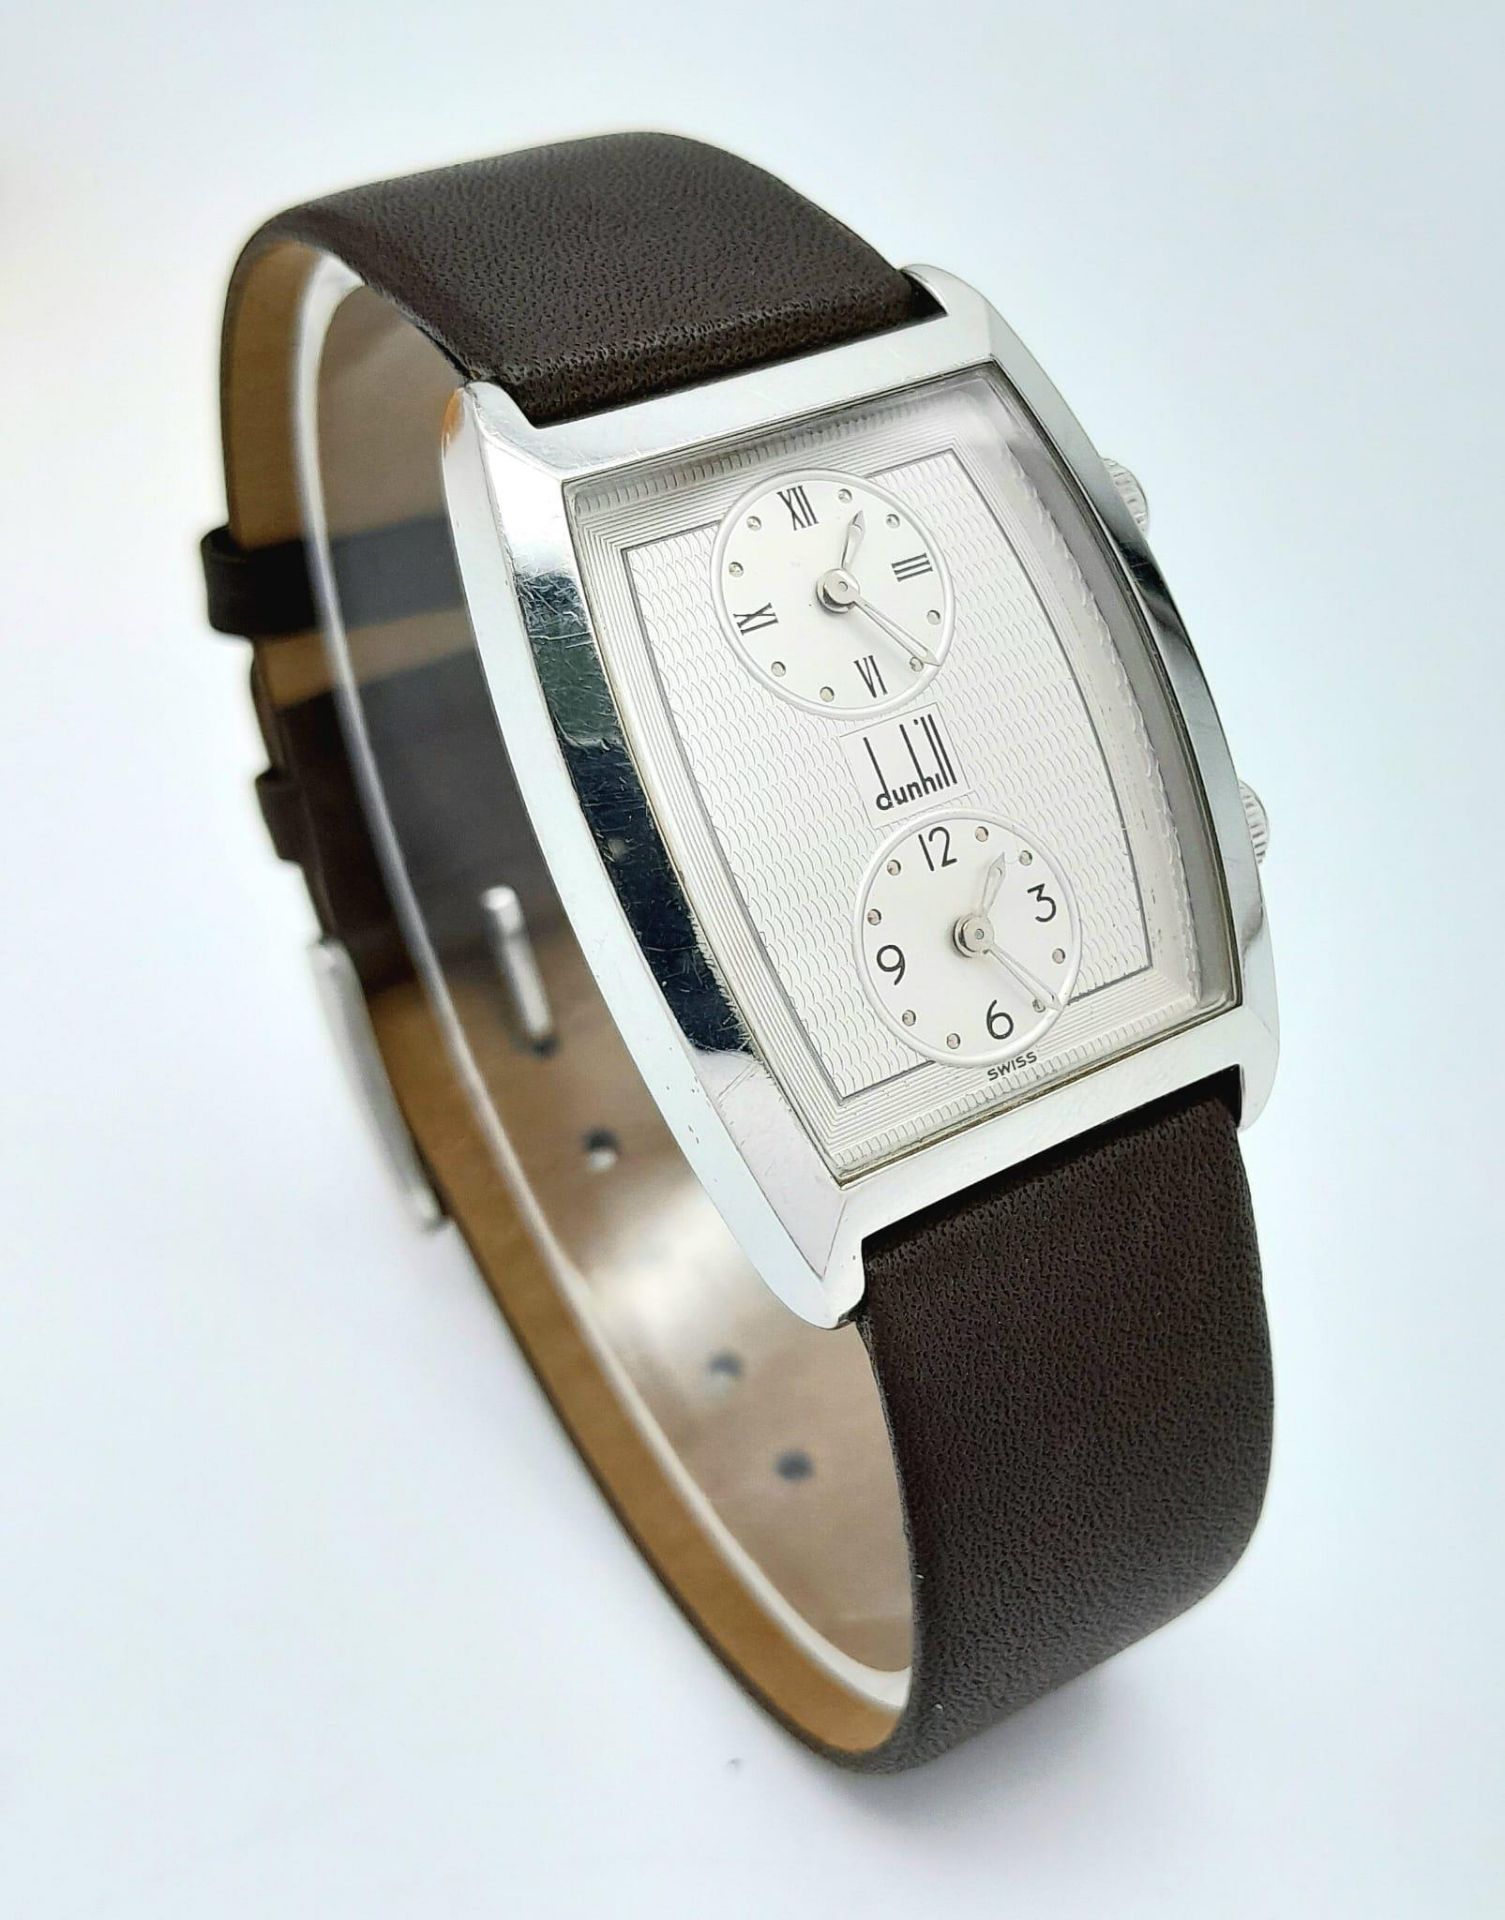 A Vintage Dunhill Quartz Dual Time Watch. Brown leather strap. Stainless steel case - 28mm. - Image 2 of 6